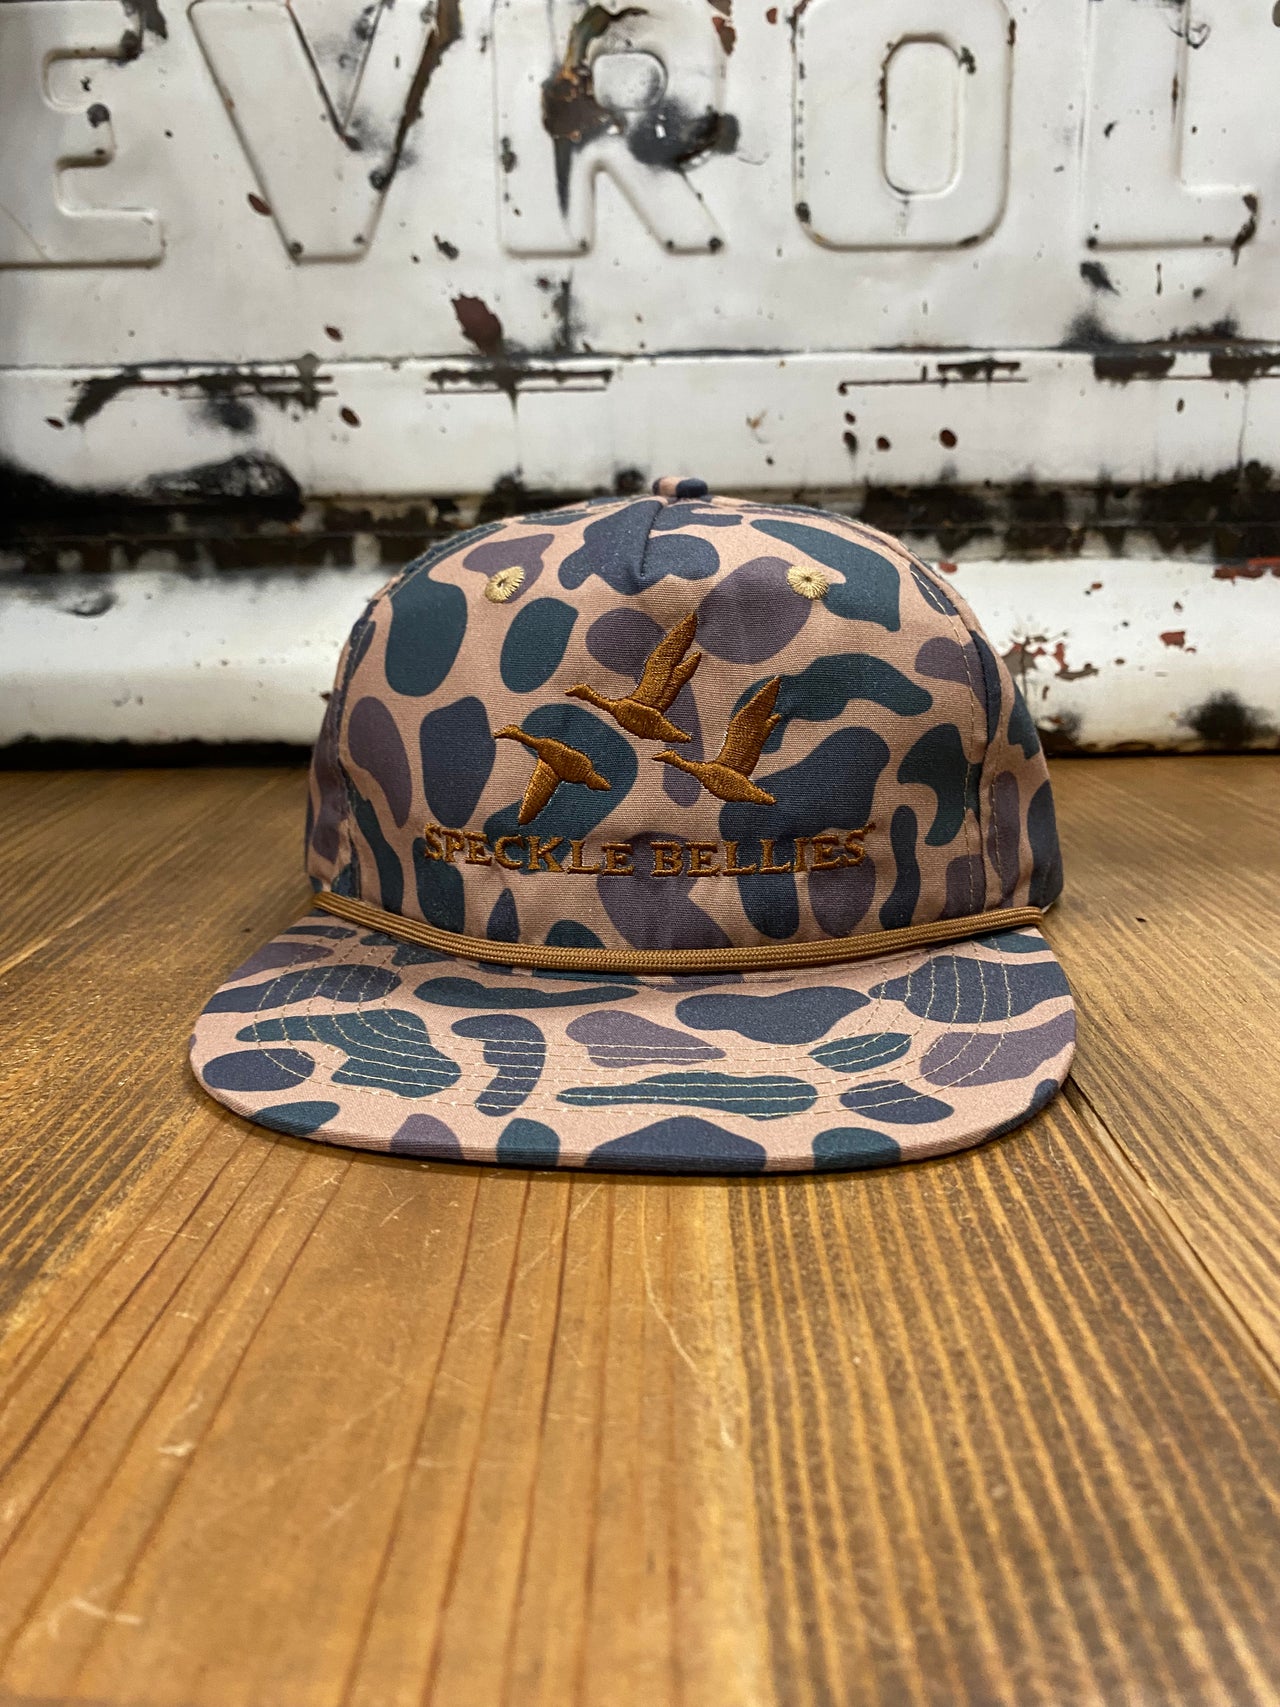 "Speckle Bellies 3 Geese 3D Rope Delta Camo Cap - A 100% cotton, Delta Camo patterned cap with 3D rope detailing of three geese, ideal for outdoor enthusiasts. The cap features a mid-crown design, adjustable snapback closure, and is crafted with durable 550 Paracord for a comfortable and versatile fit. One Size Fits Most."